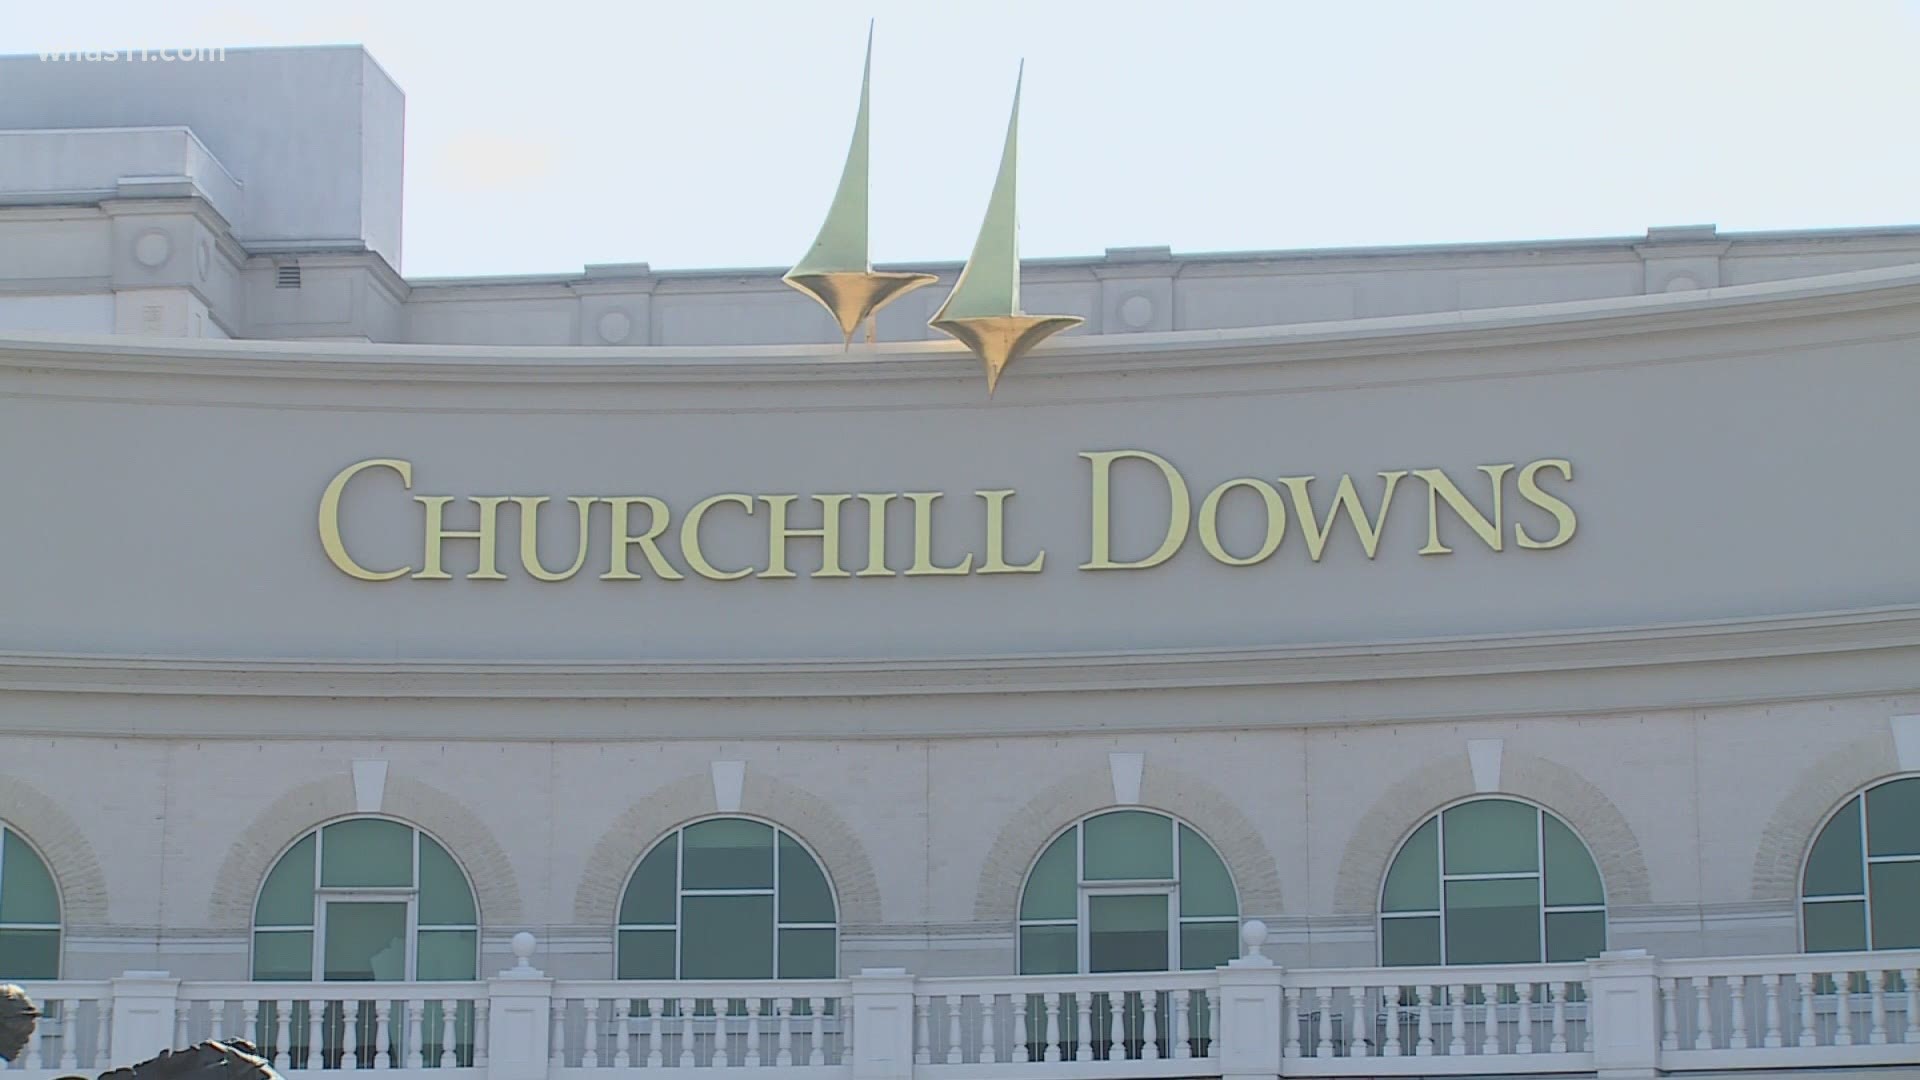 For the first time all year, fans will be allowed inside the gates here at Churchill Downs for live horseracing starting on Sunday.